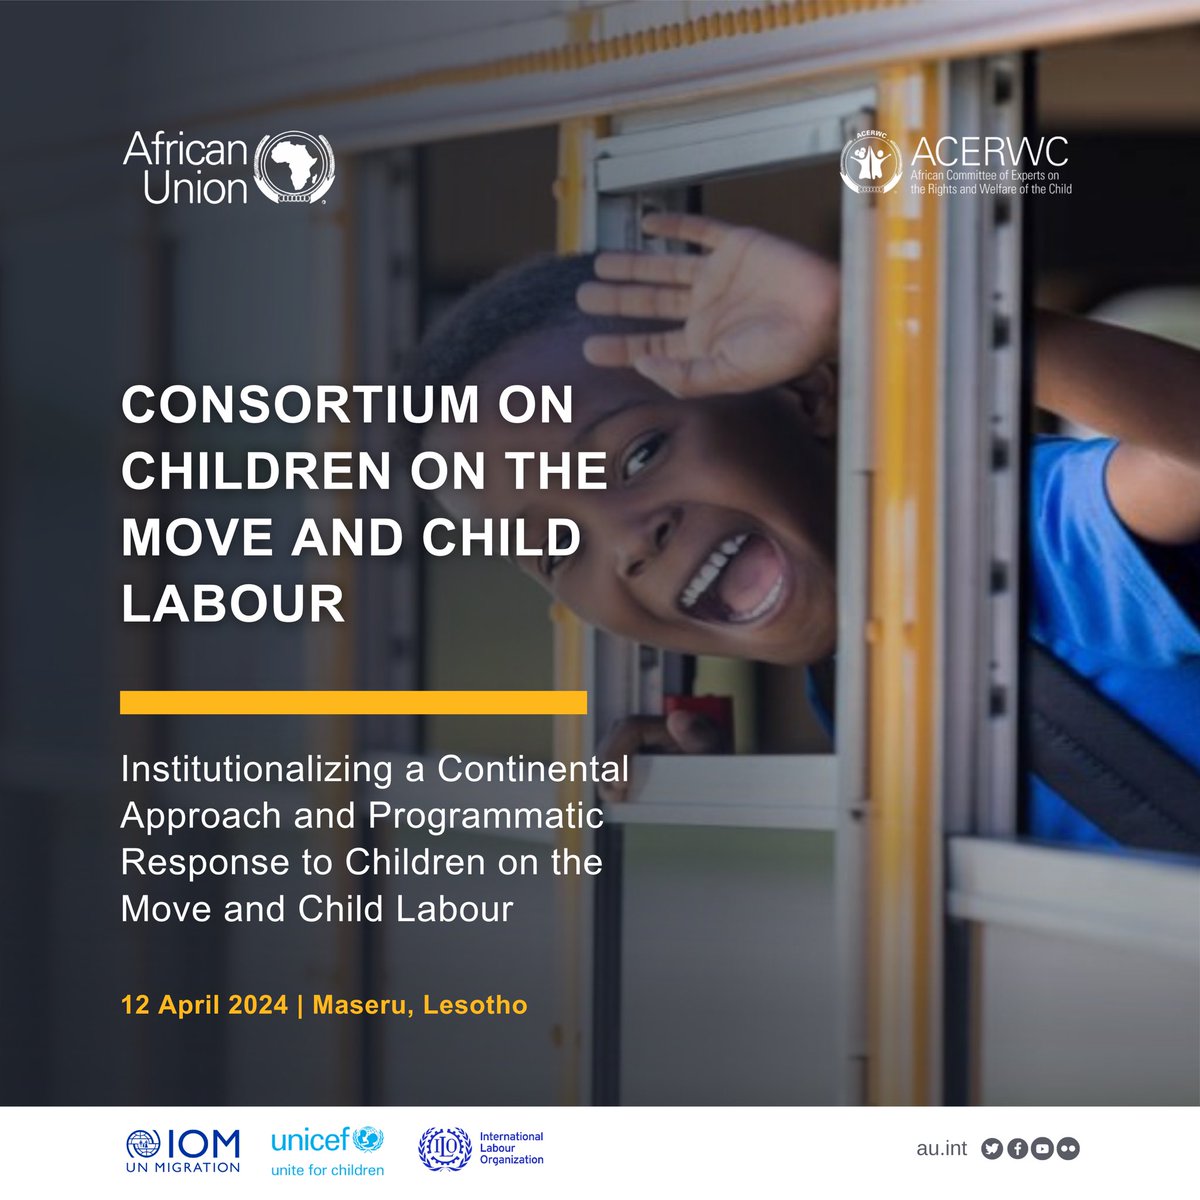 #HappeningToday: Official launch of the @_AfricanUnion “Consortium on Children on the Move and Child Labour”. Together, we are institutionalizing a continental approach to protect vulnerable children in #Africa.  📆: 12 April! 📍 Maseru🇱🇸 #ChildProtection #LabourRights